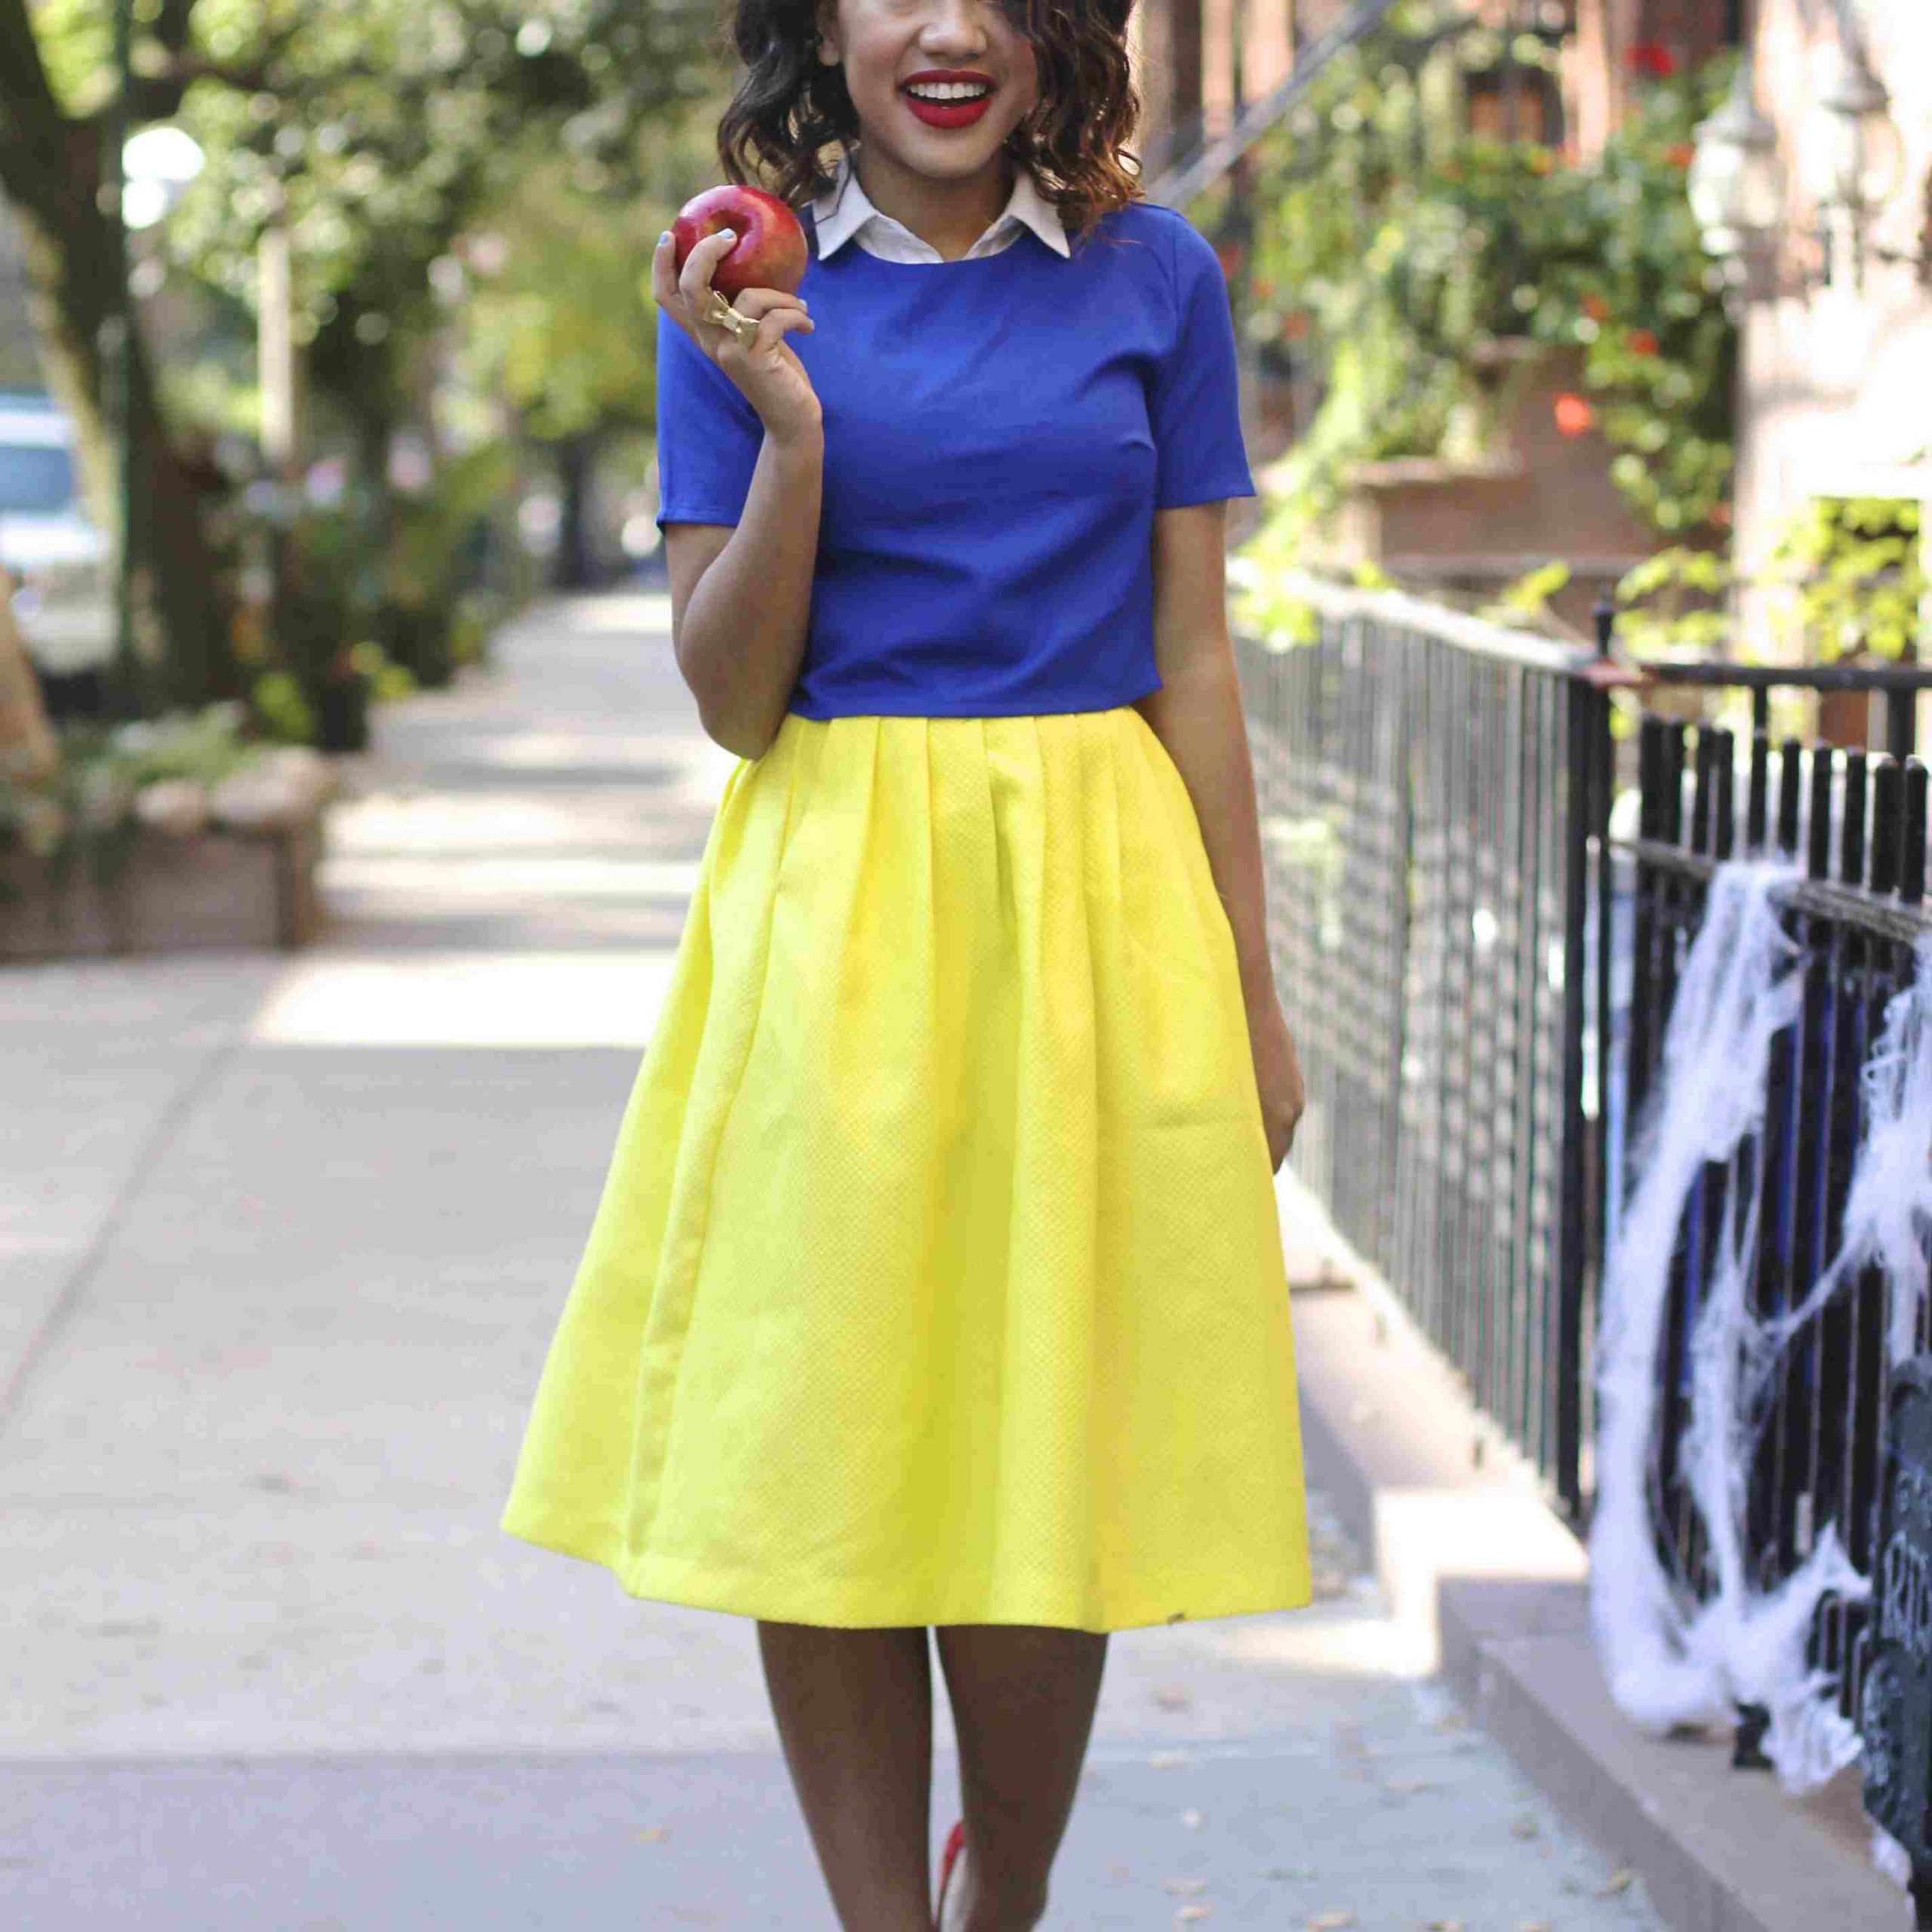 Snow White Costumes DIY
 50 Easy DIY Halloween Costume Ideas for Adults